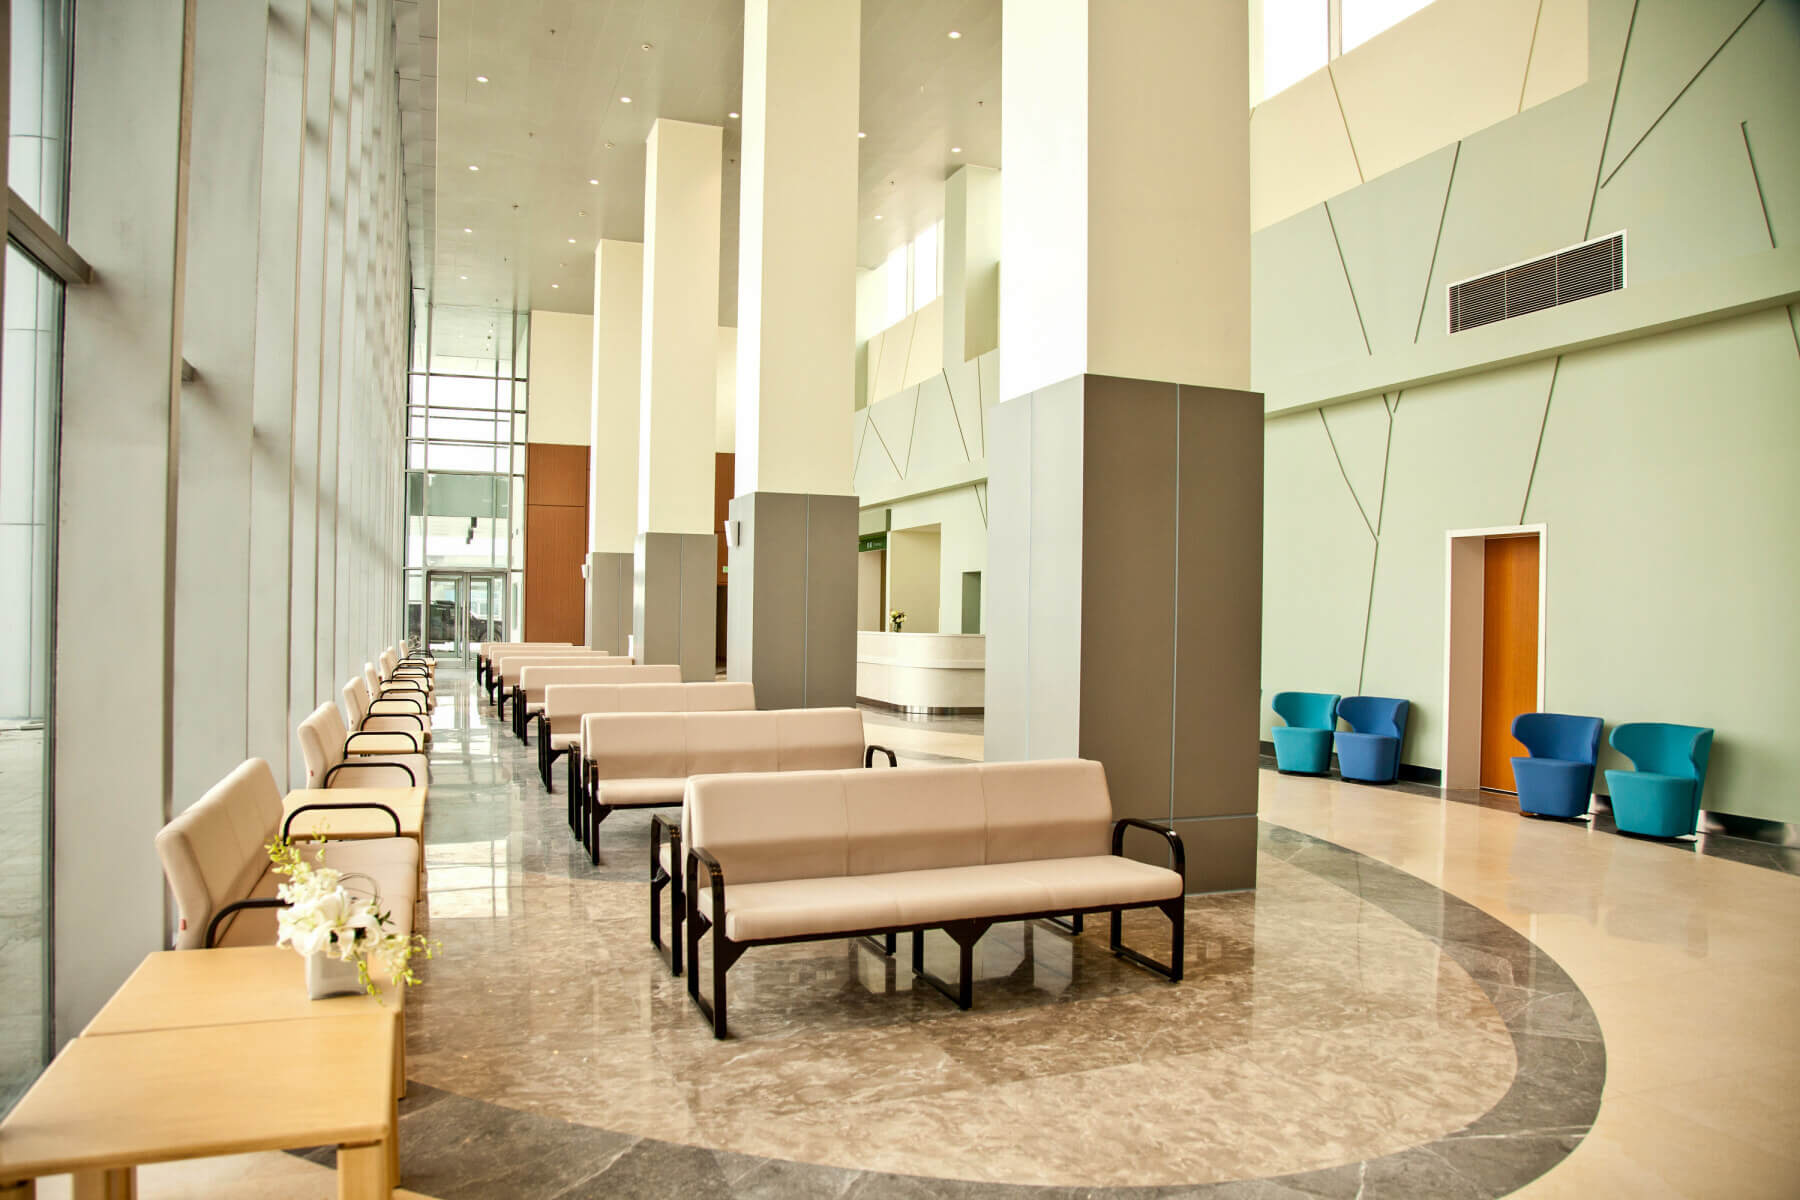 two-story lobby with benches and chairs for waiting